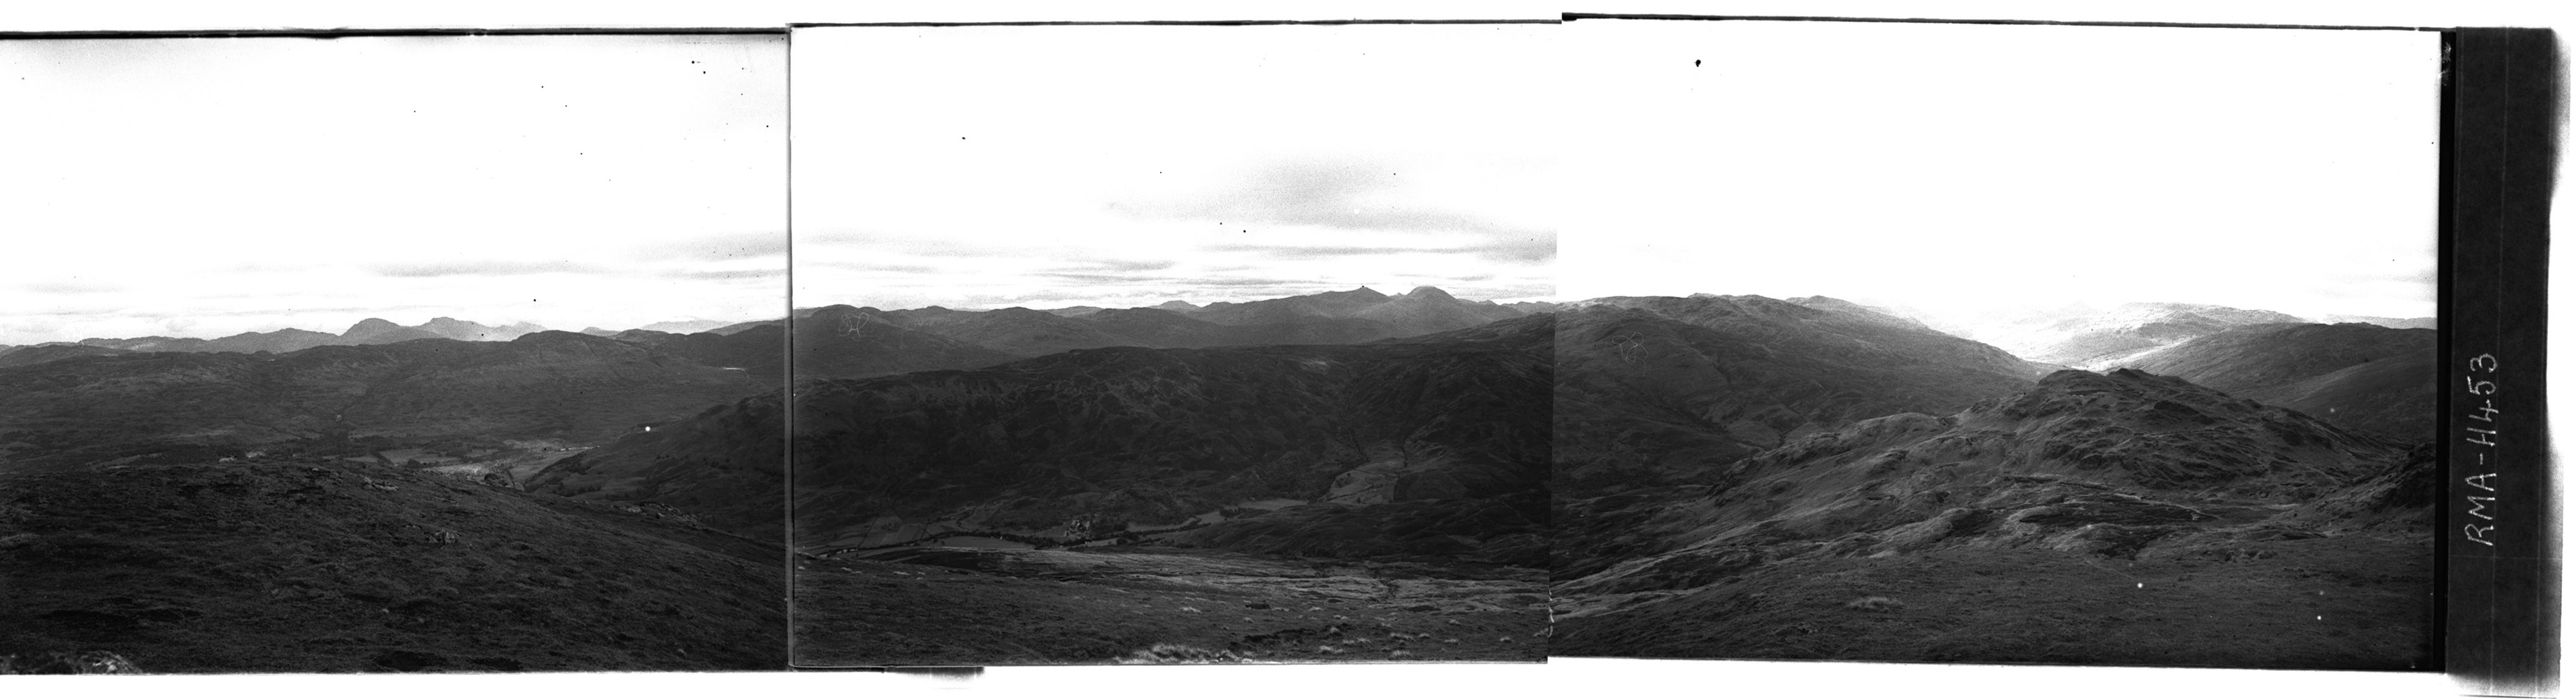 Panoramic view looking south from Creag na Caillich. (RMA-H-451, RMA-H-452, RMA-H-453)